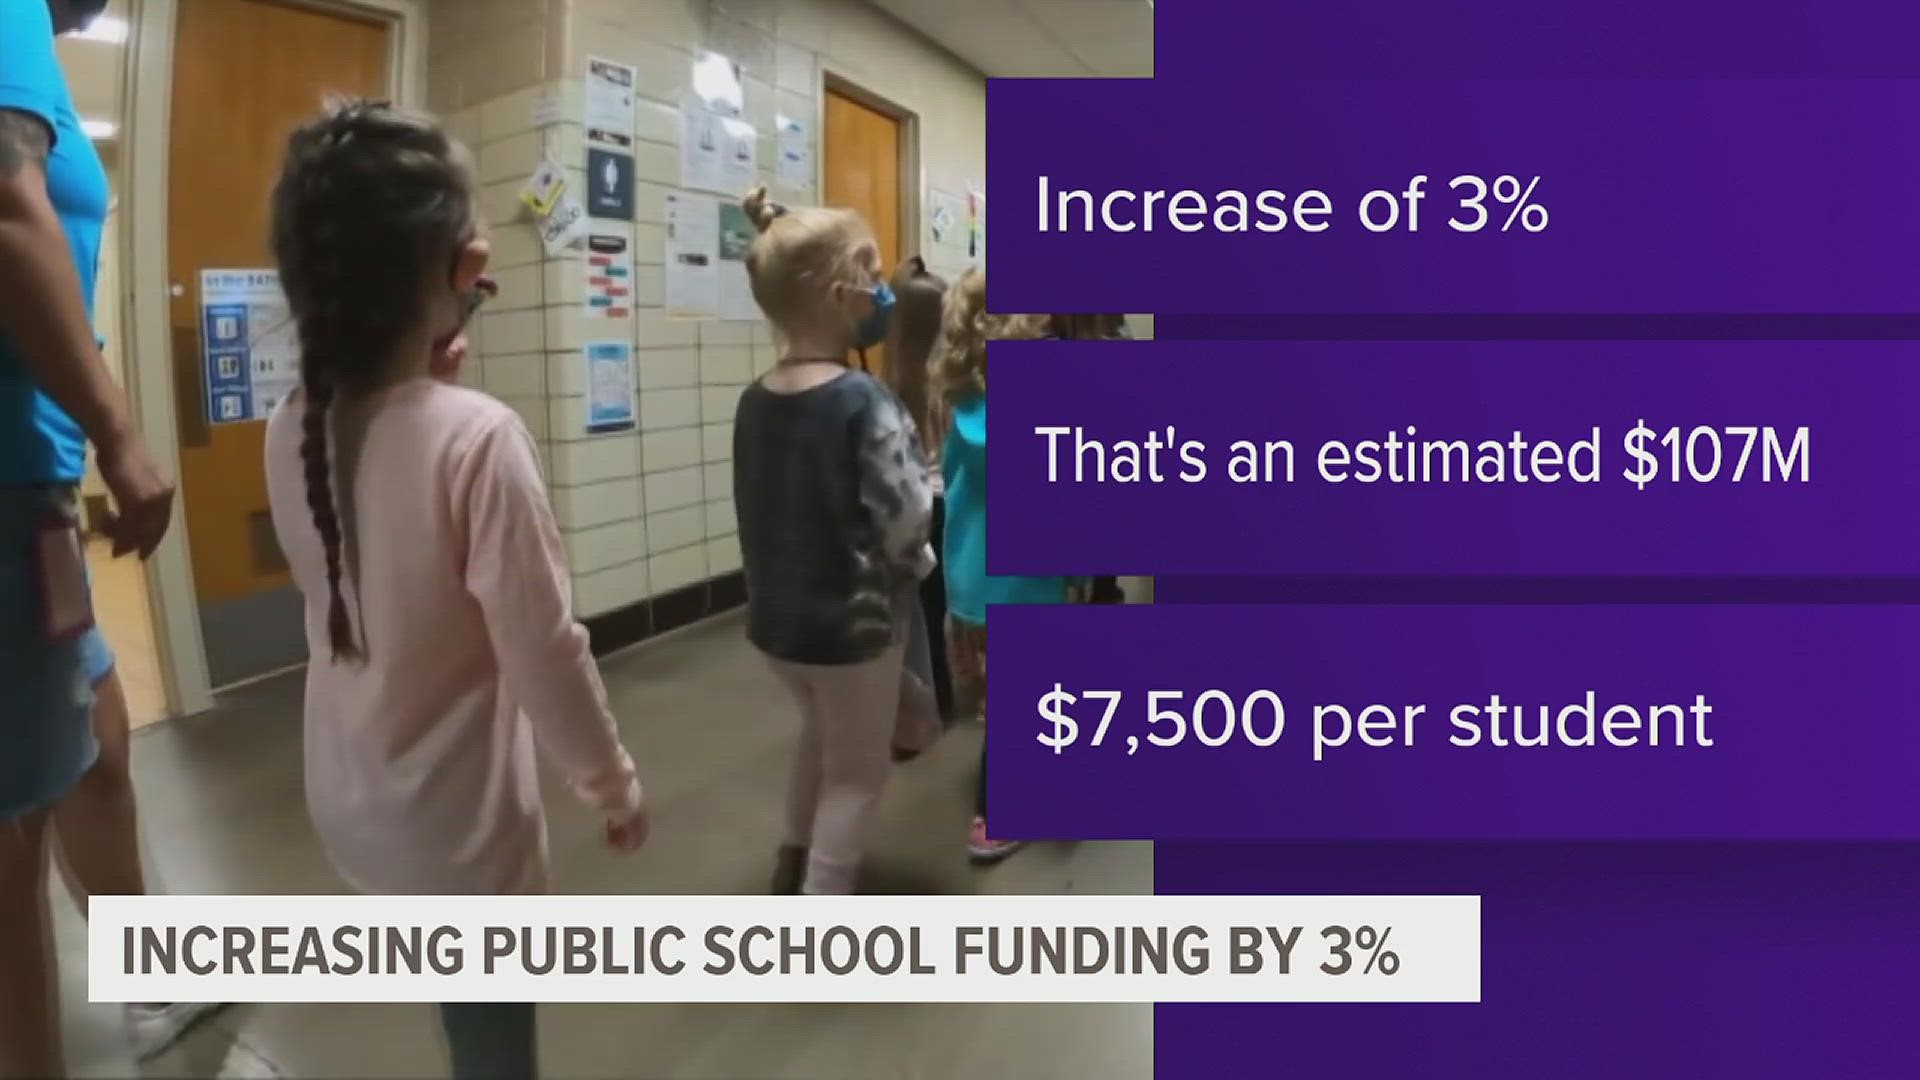 The bill would increase public school funding by 3%, or about $107 million — more than $7,500 per student.